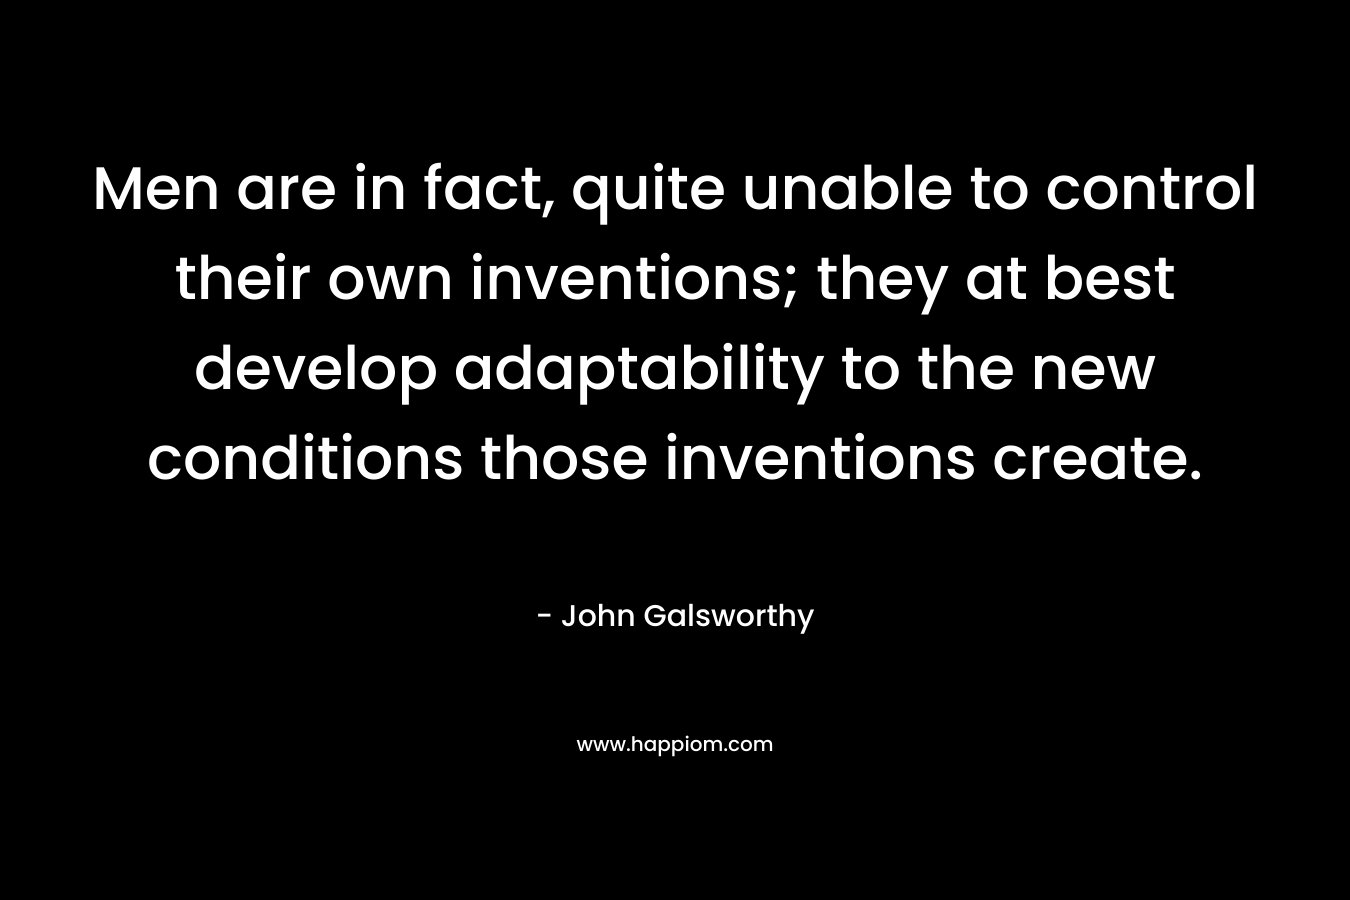 Men are in fact, quite unable to control their own inventions; they at best develop adaptability to the new conditions those inventions create. – John Galsworthy